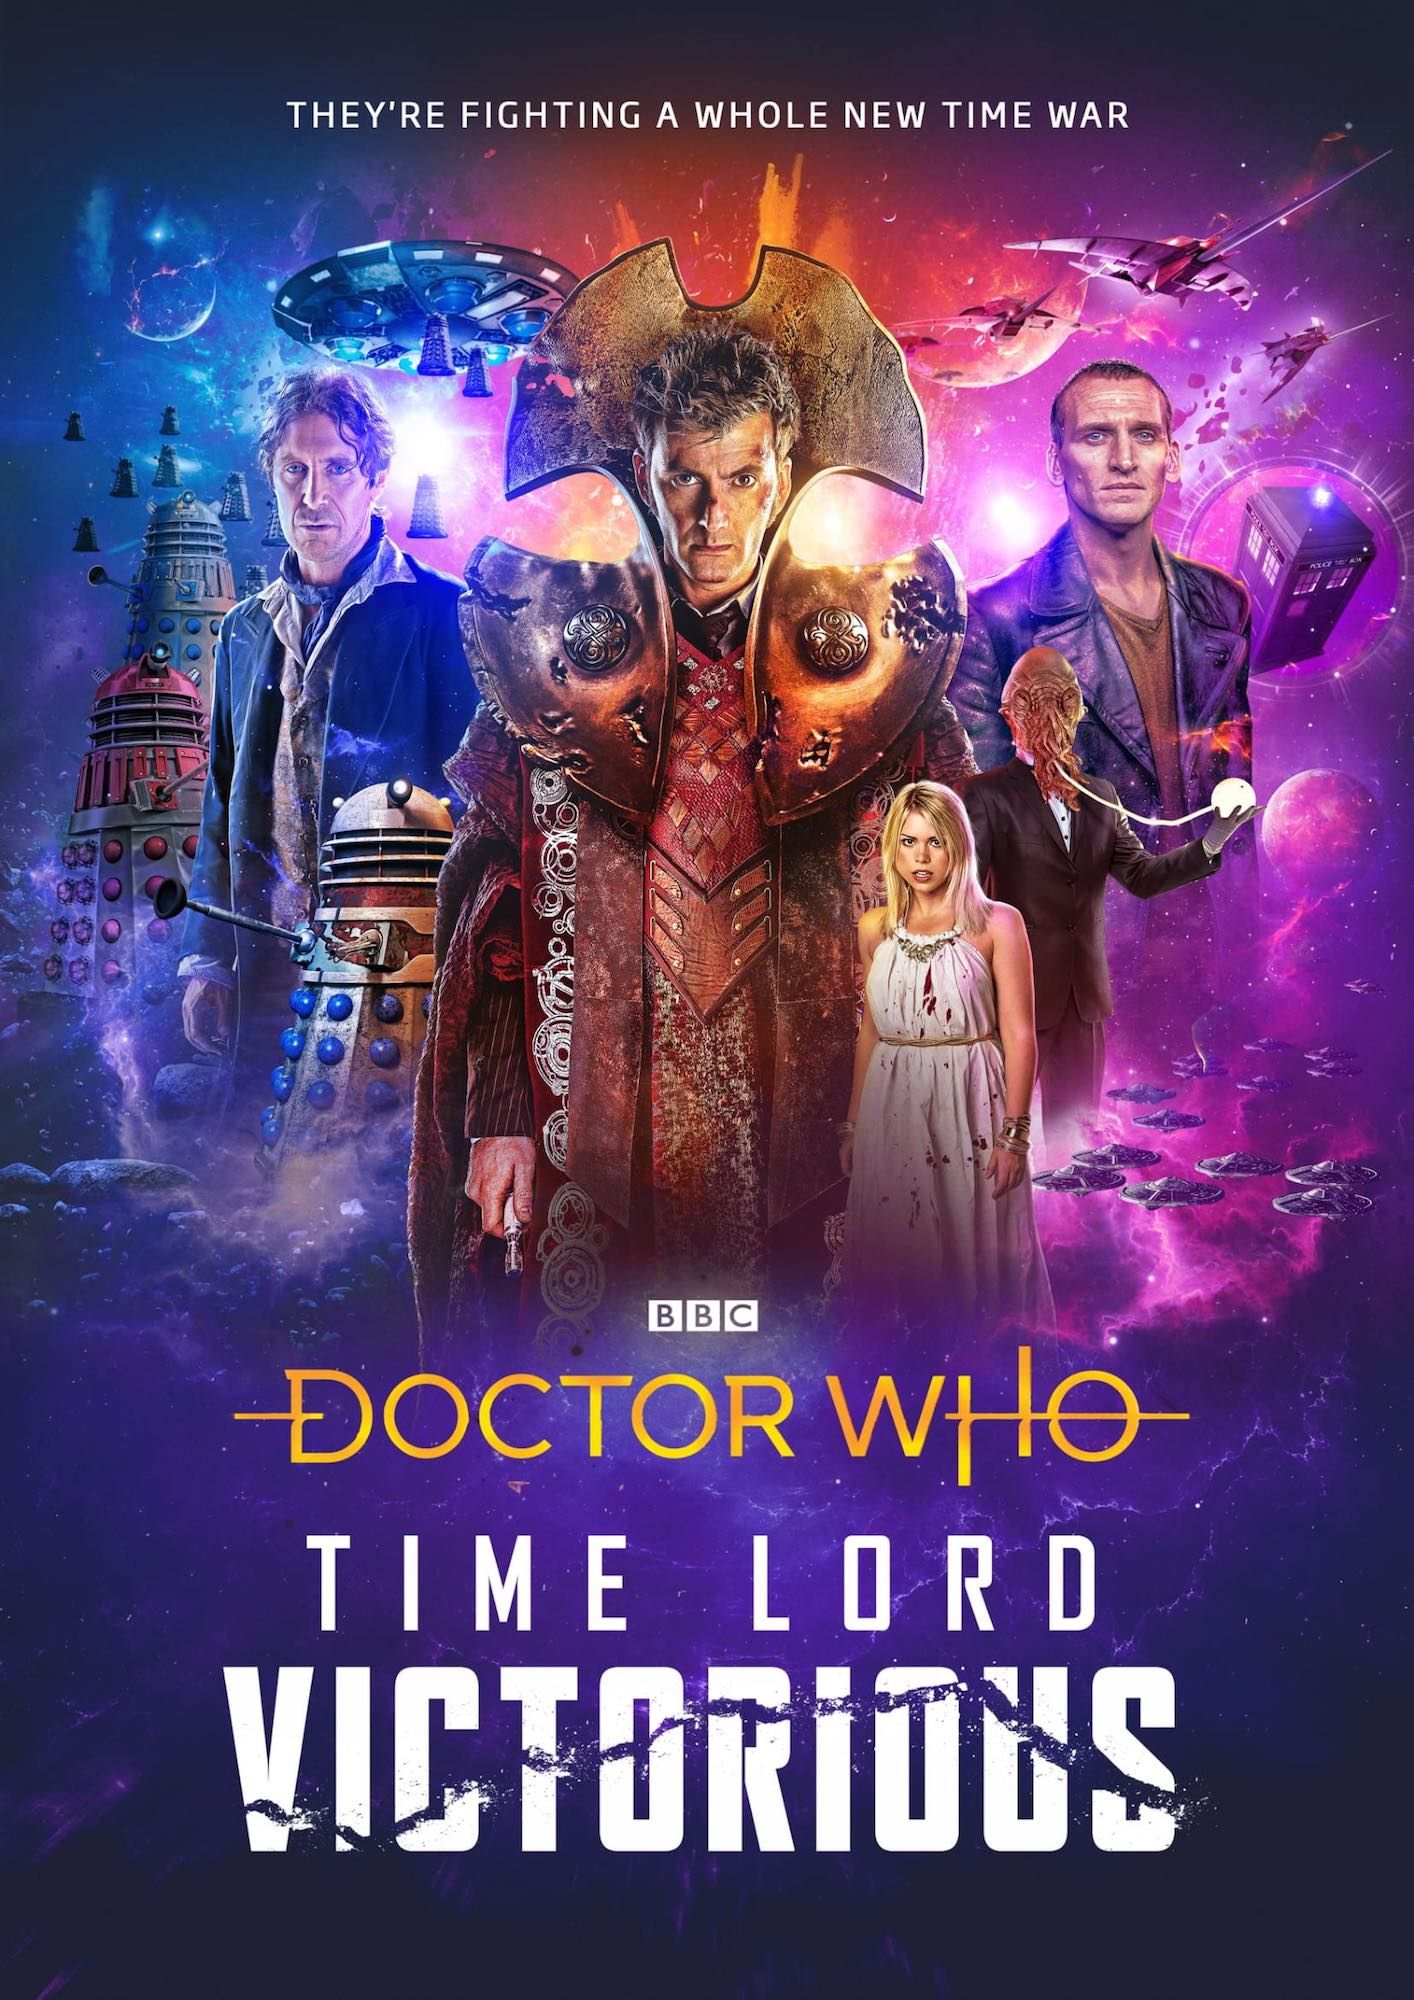 Doctor Who Time Lord Victorious Official Poster